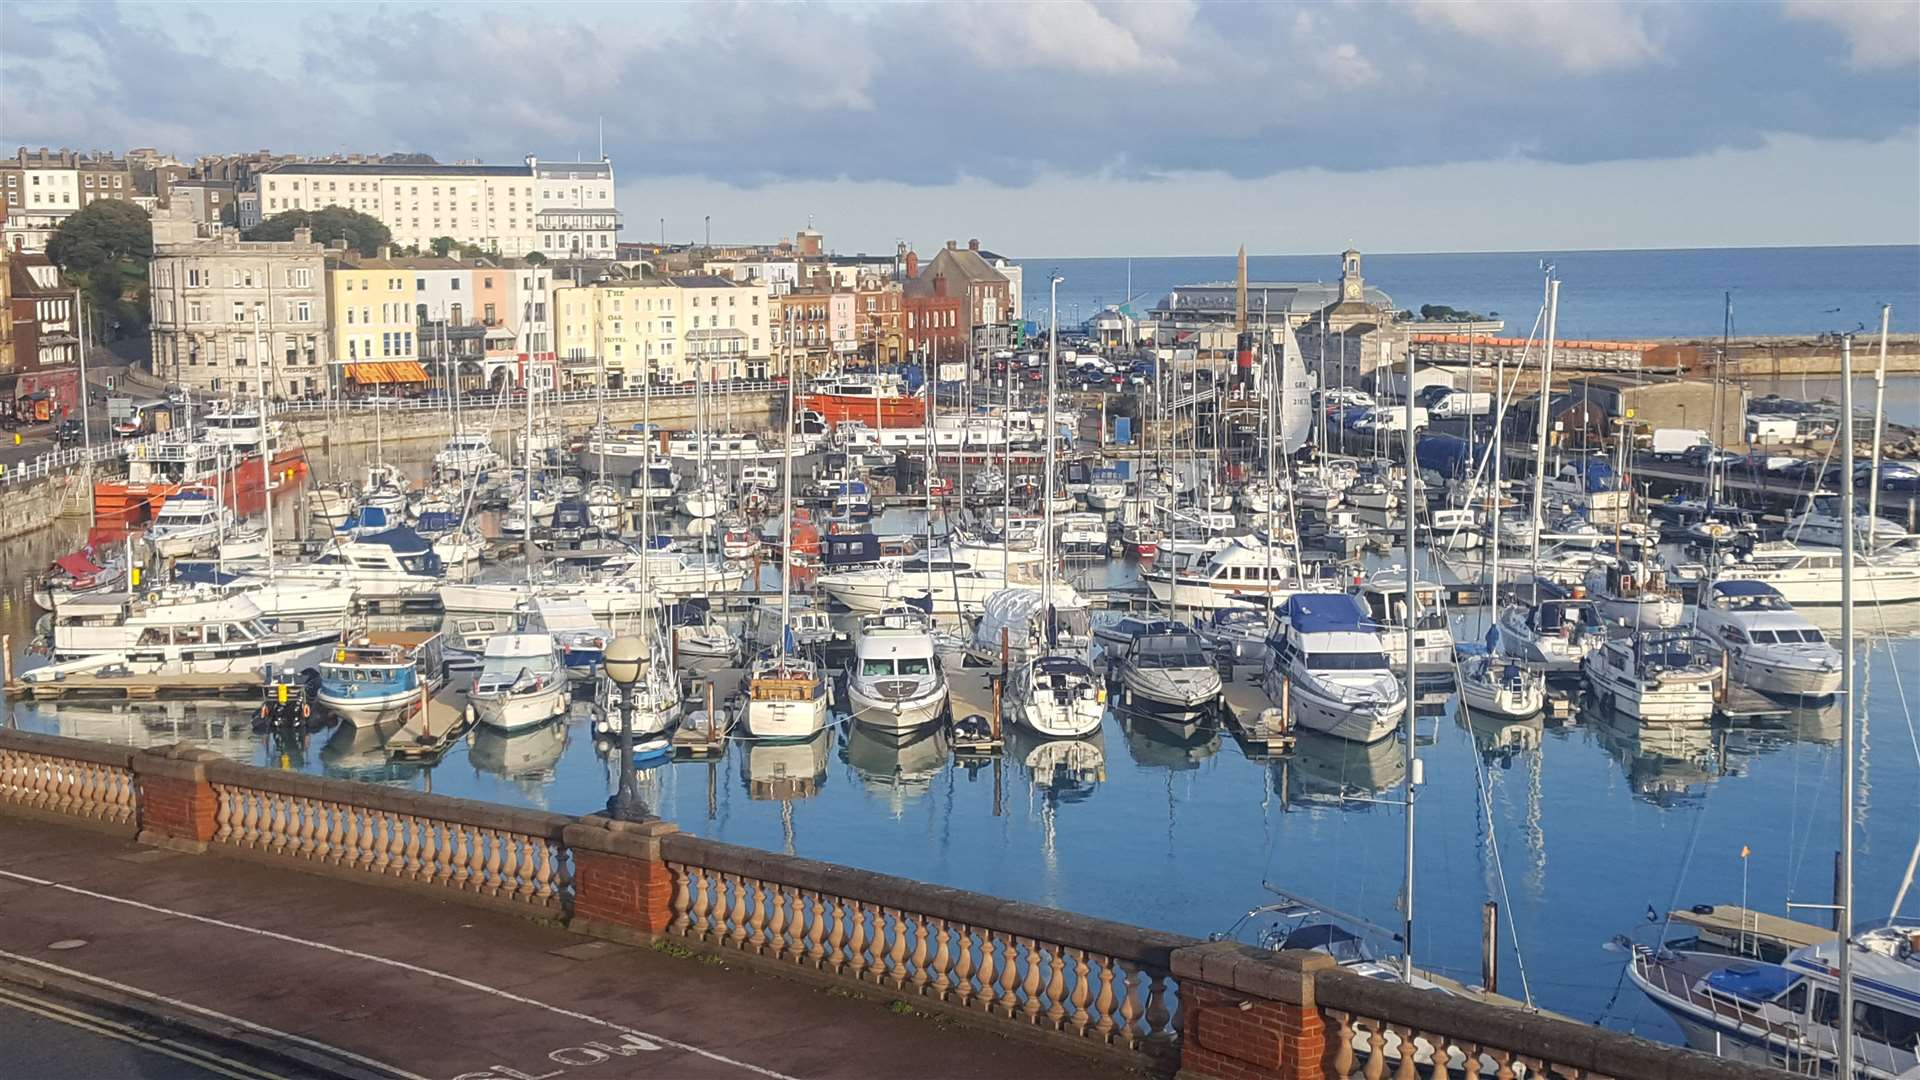 Ramsgate harbour was praised in the report